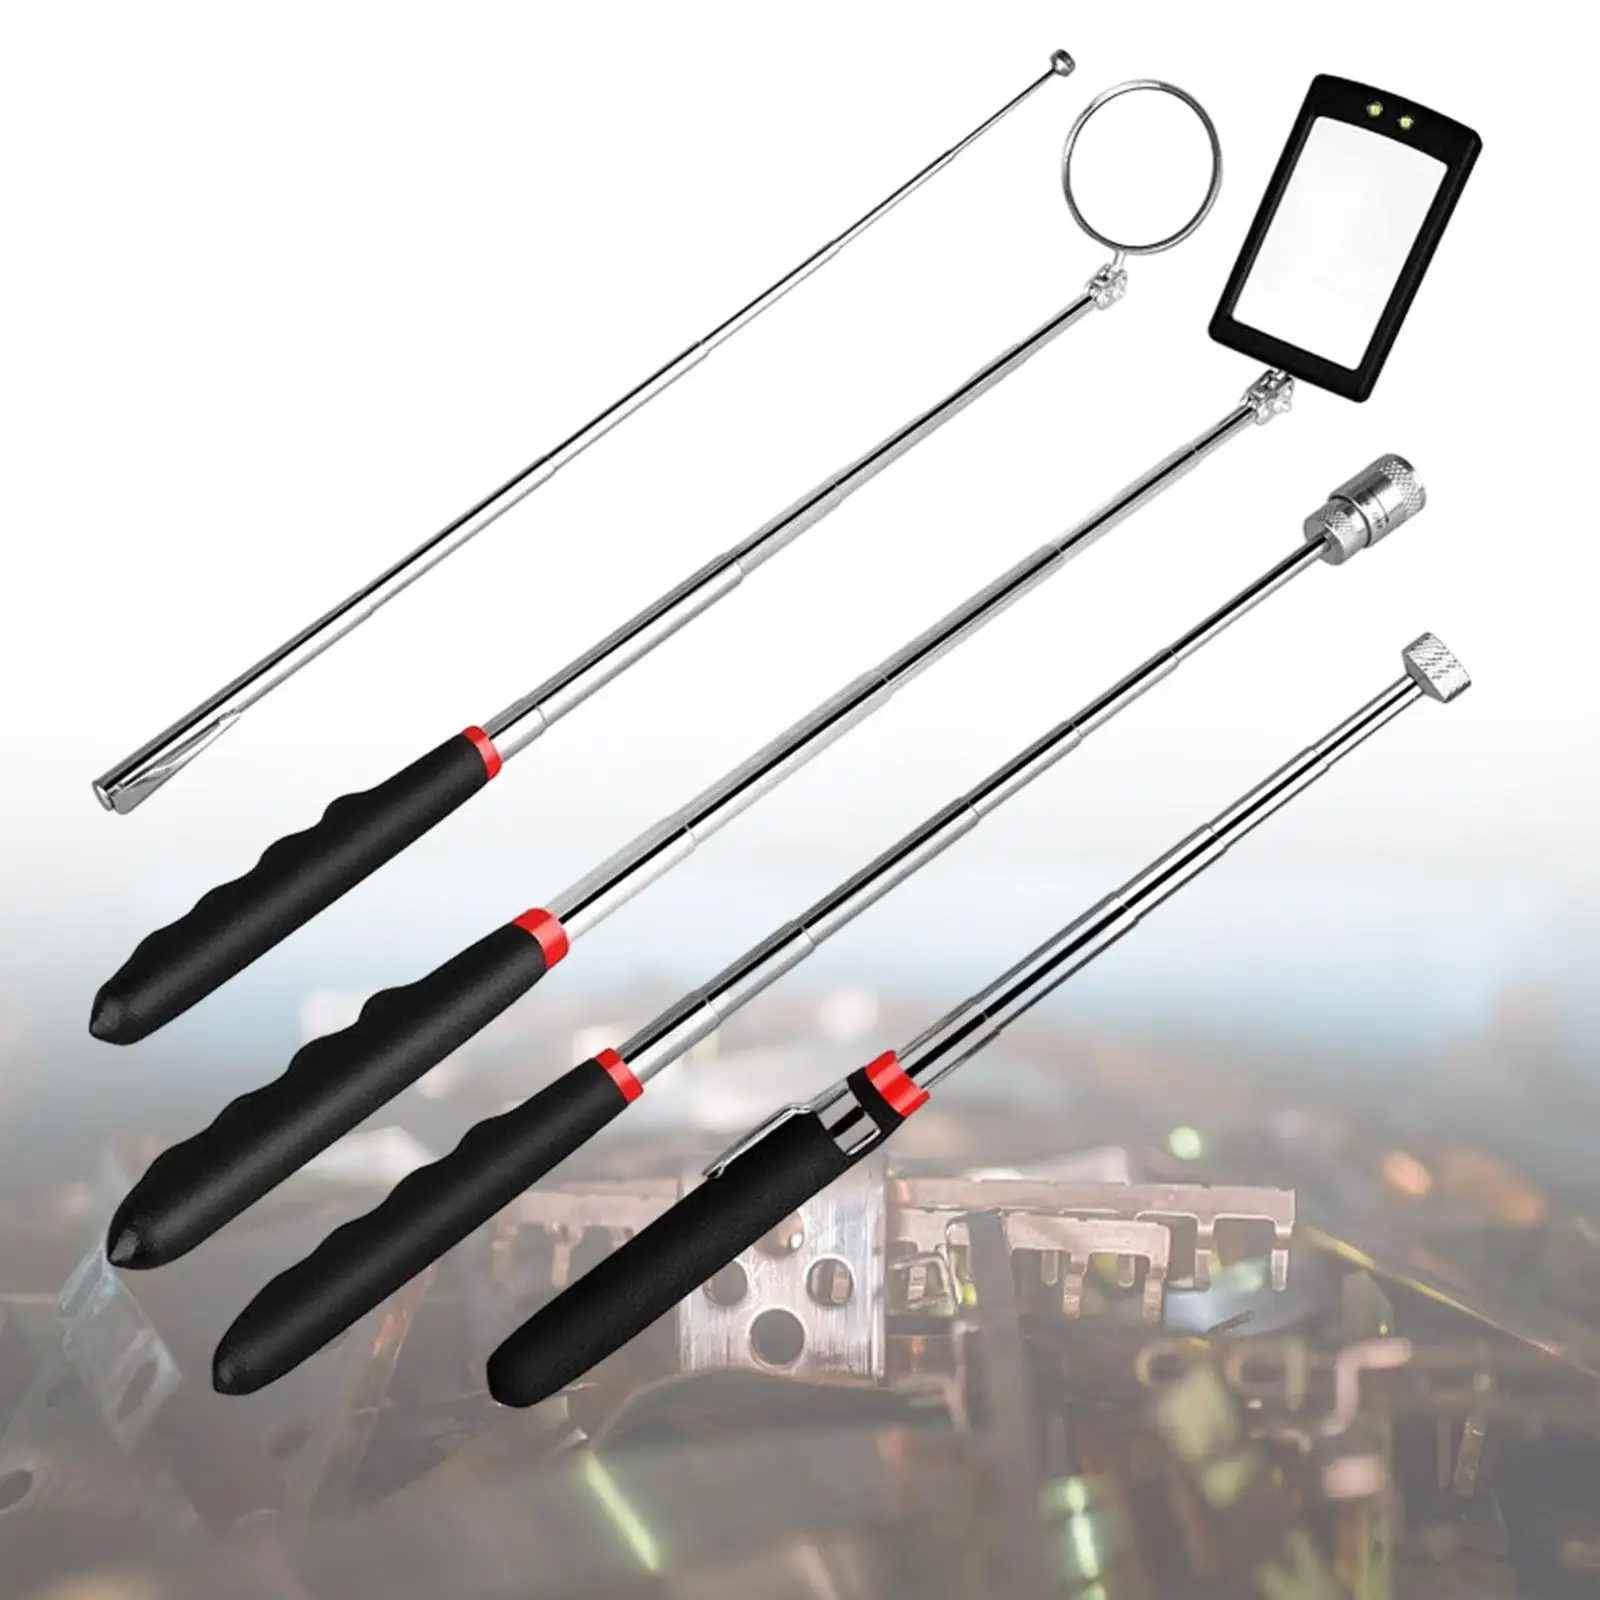 5 Pieces Magnetic Telescoping Grabber Tool 360 Swivel Head Battery Powered Flexible Flashlight for Viewing Pickup Dead Angle